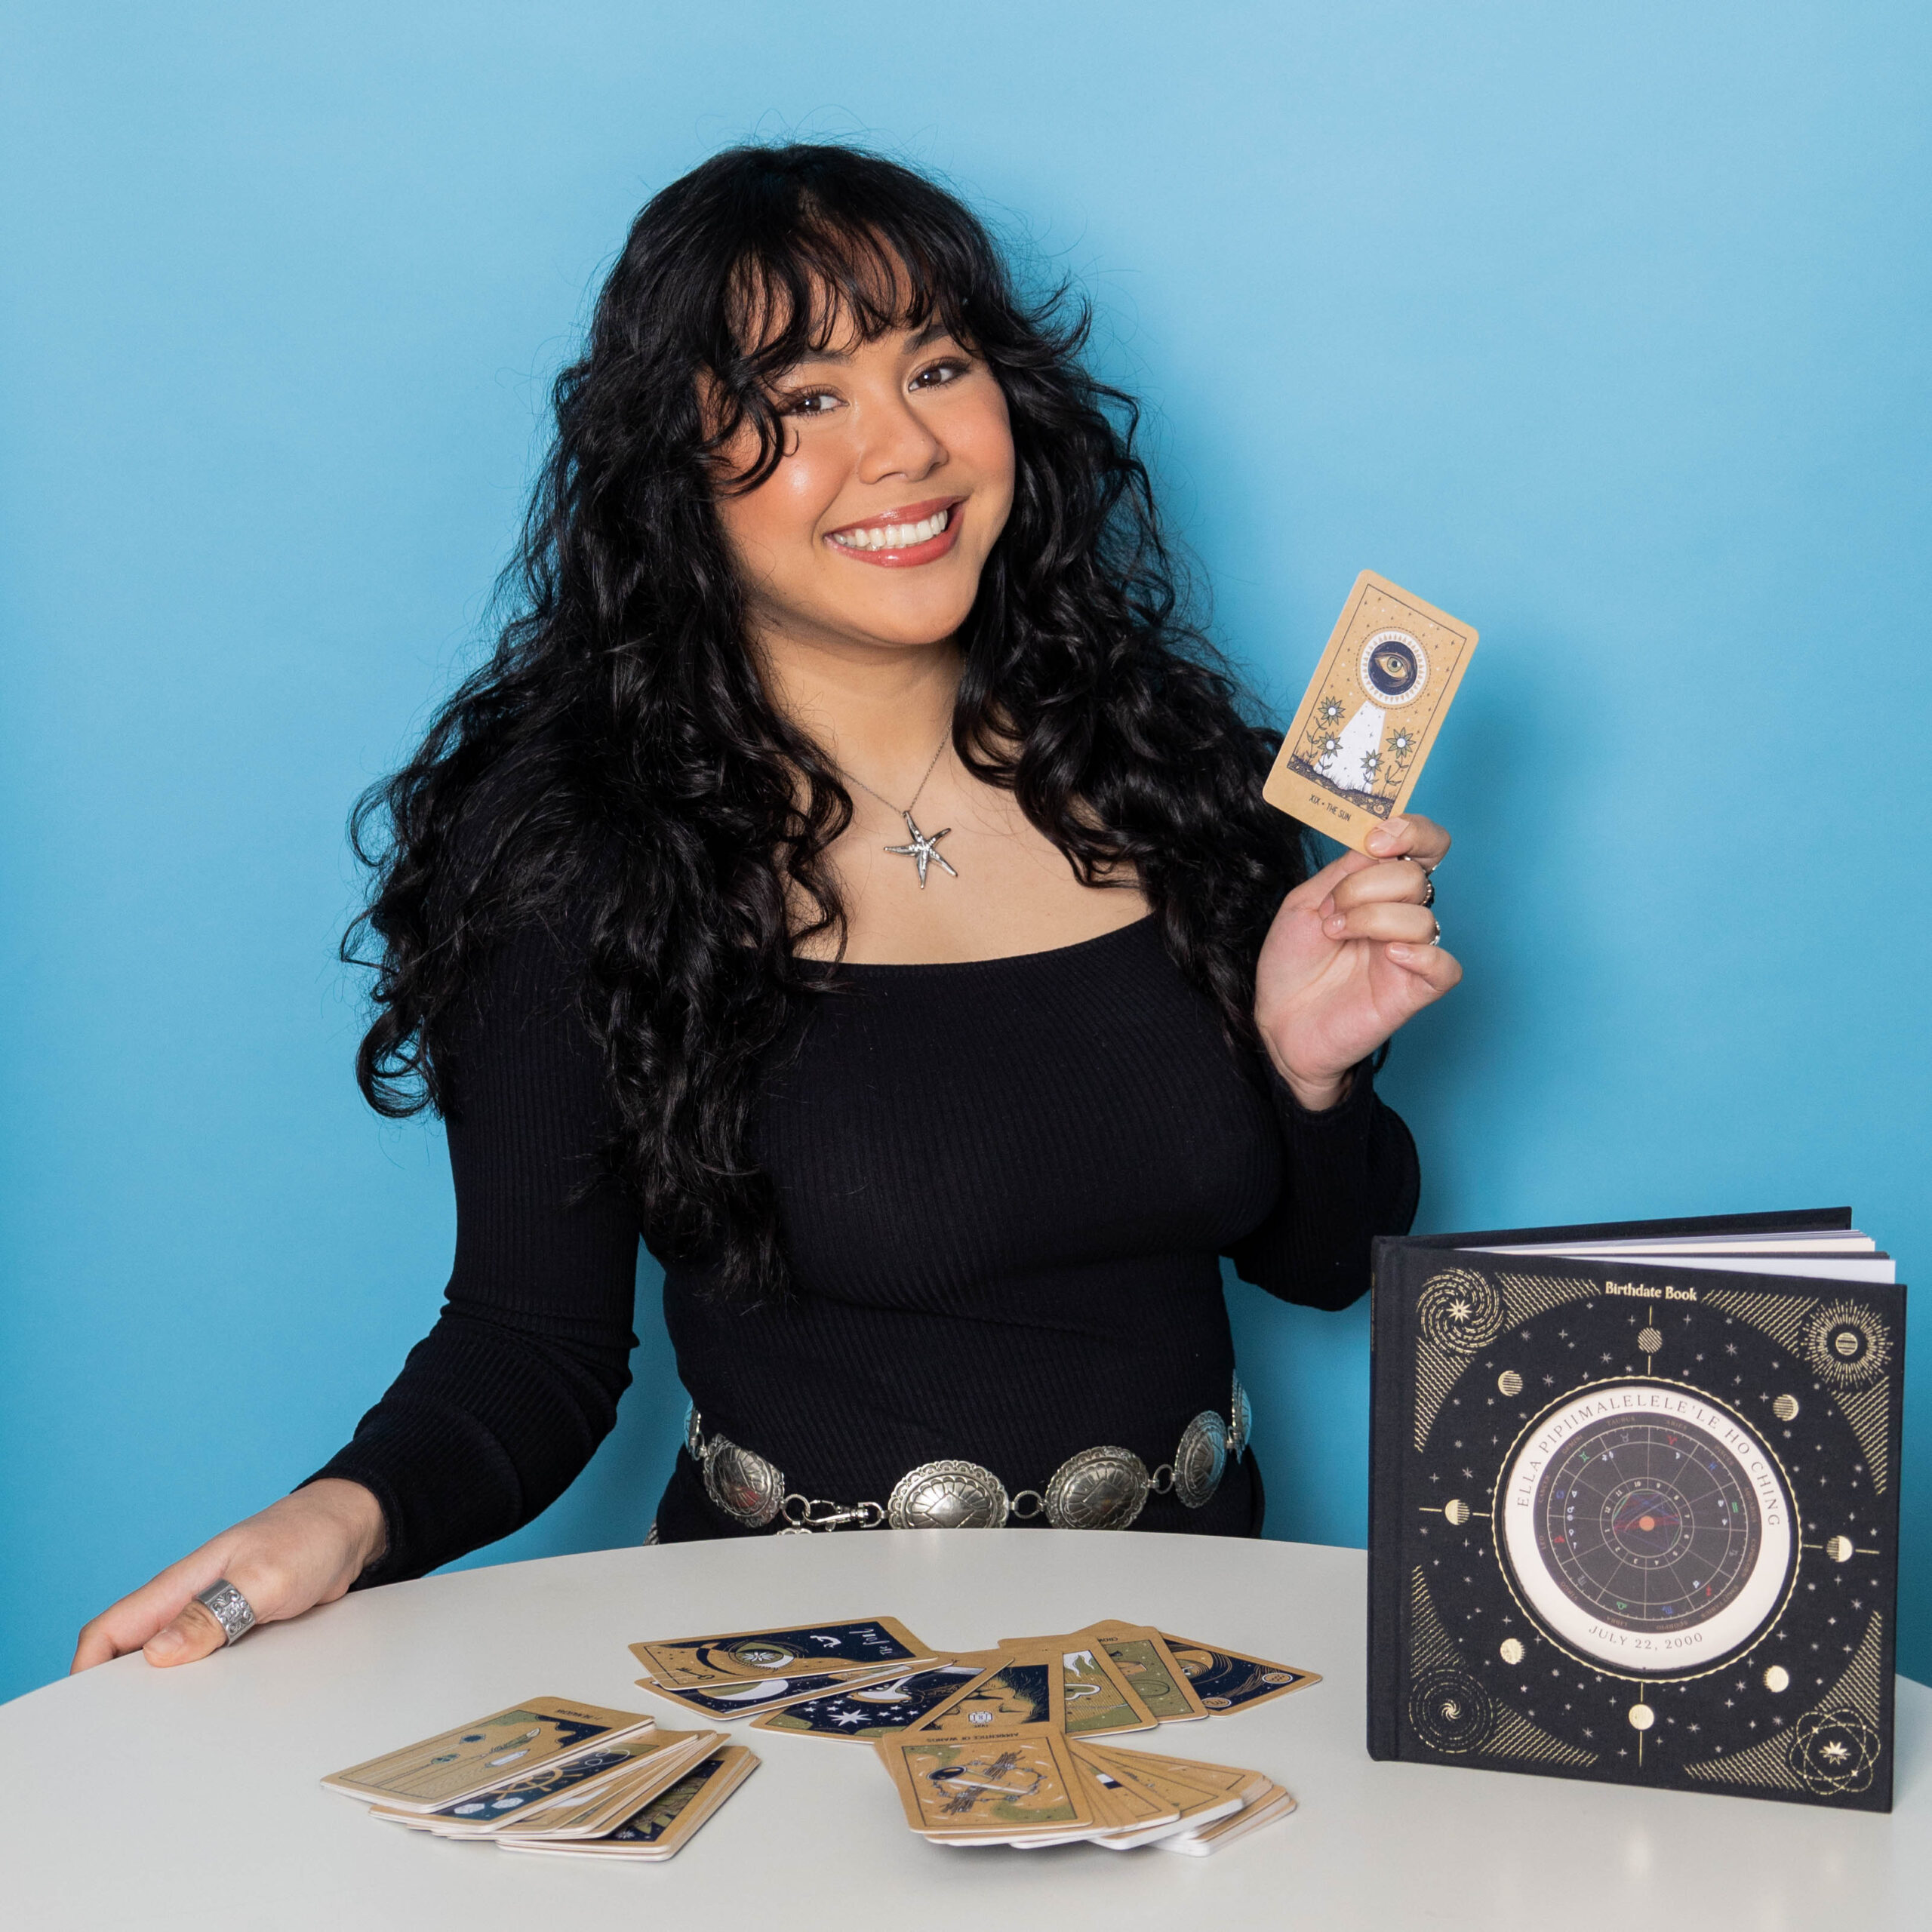 Headshot of a woman in a black color shirt holding tarot cards